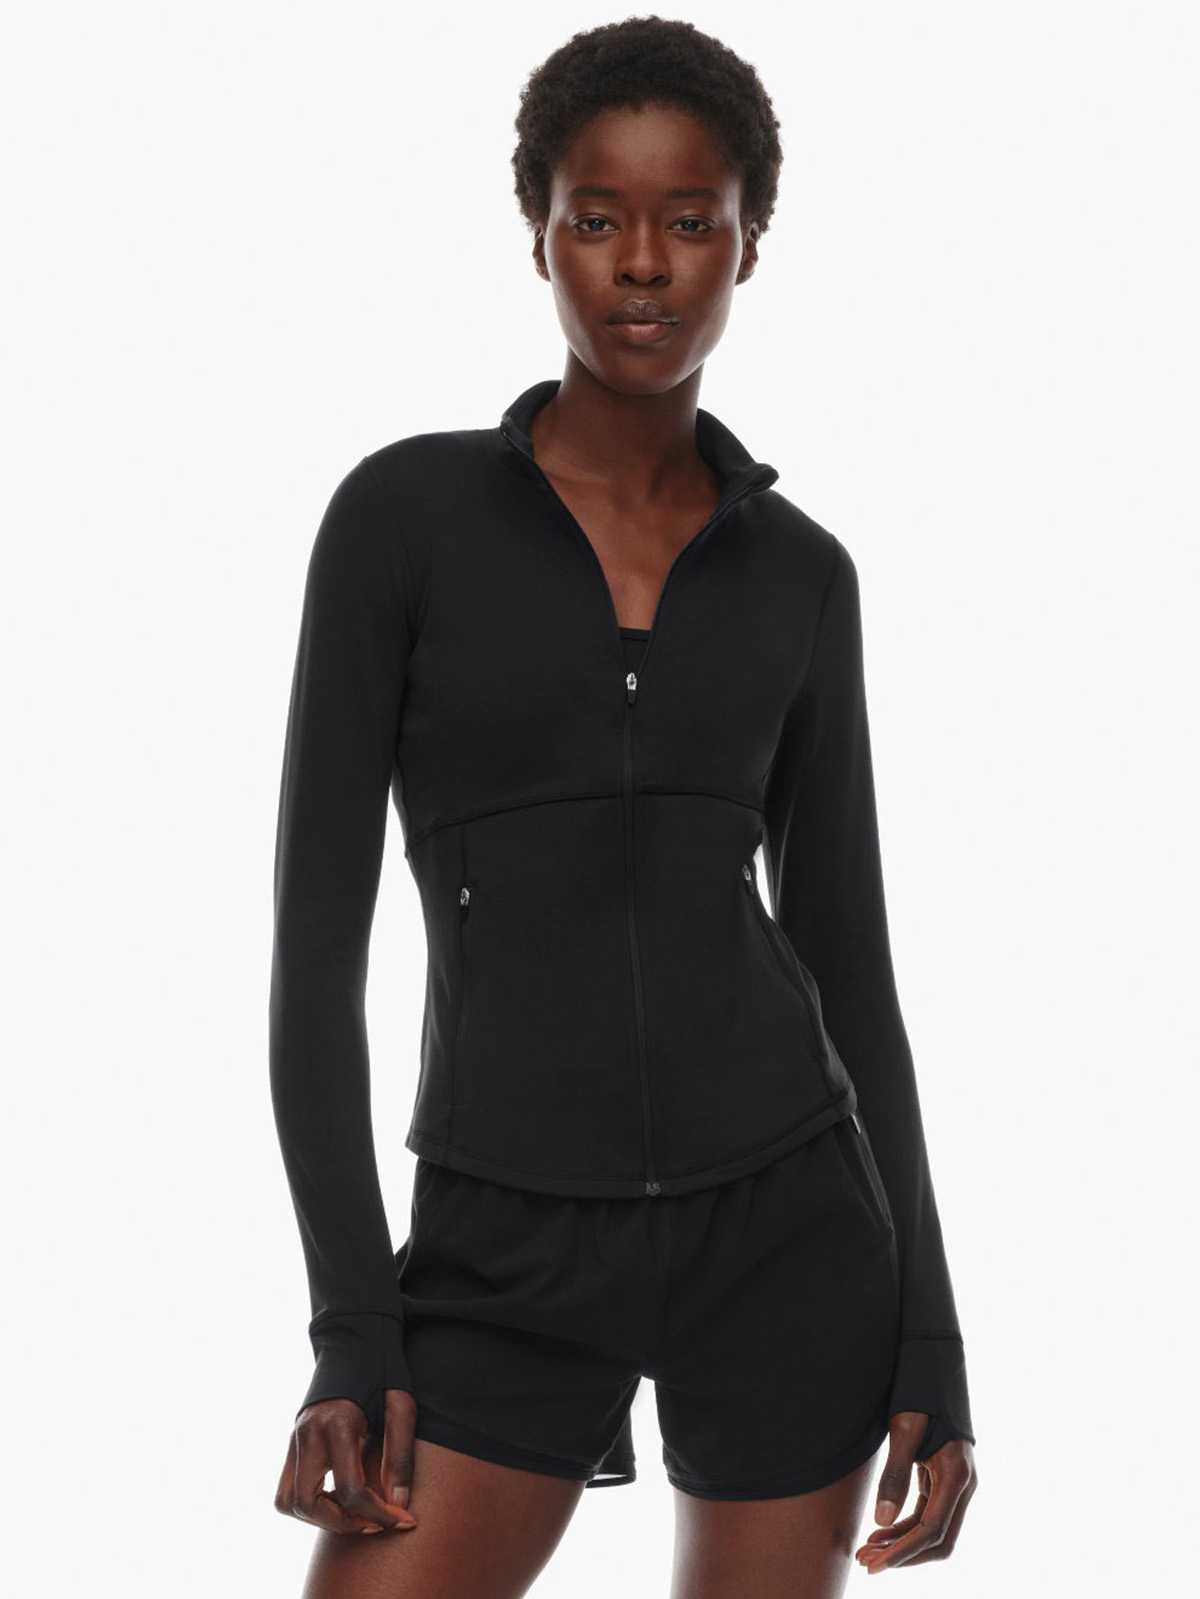 Black Aritzia fitted workout jacket